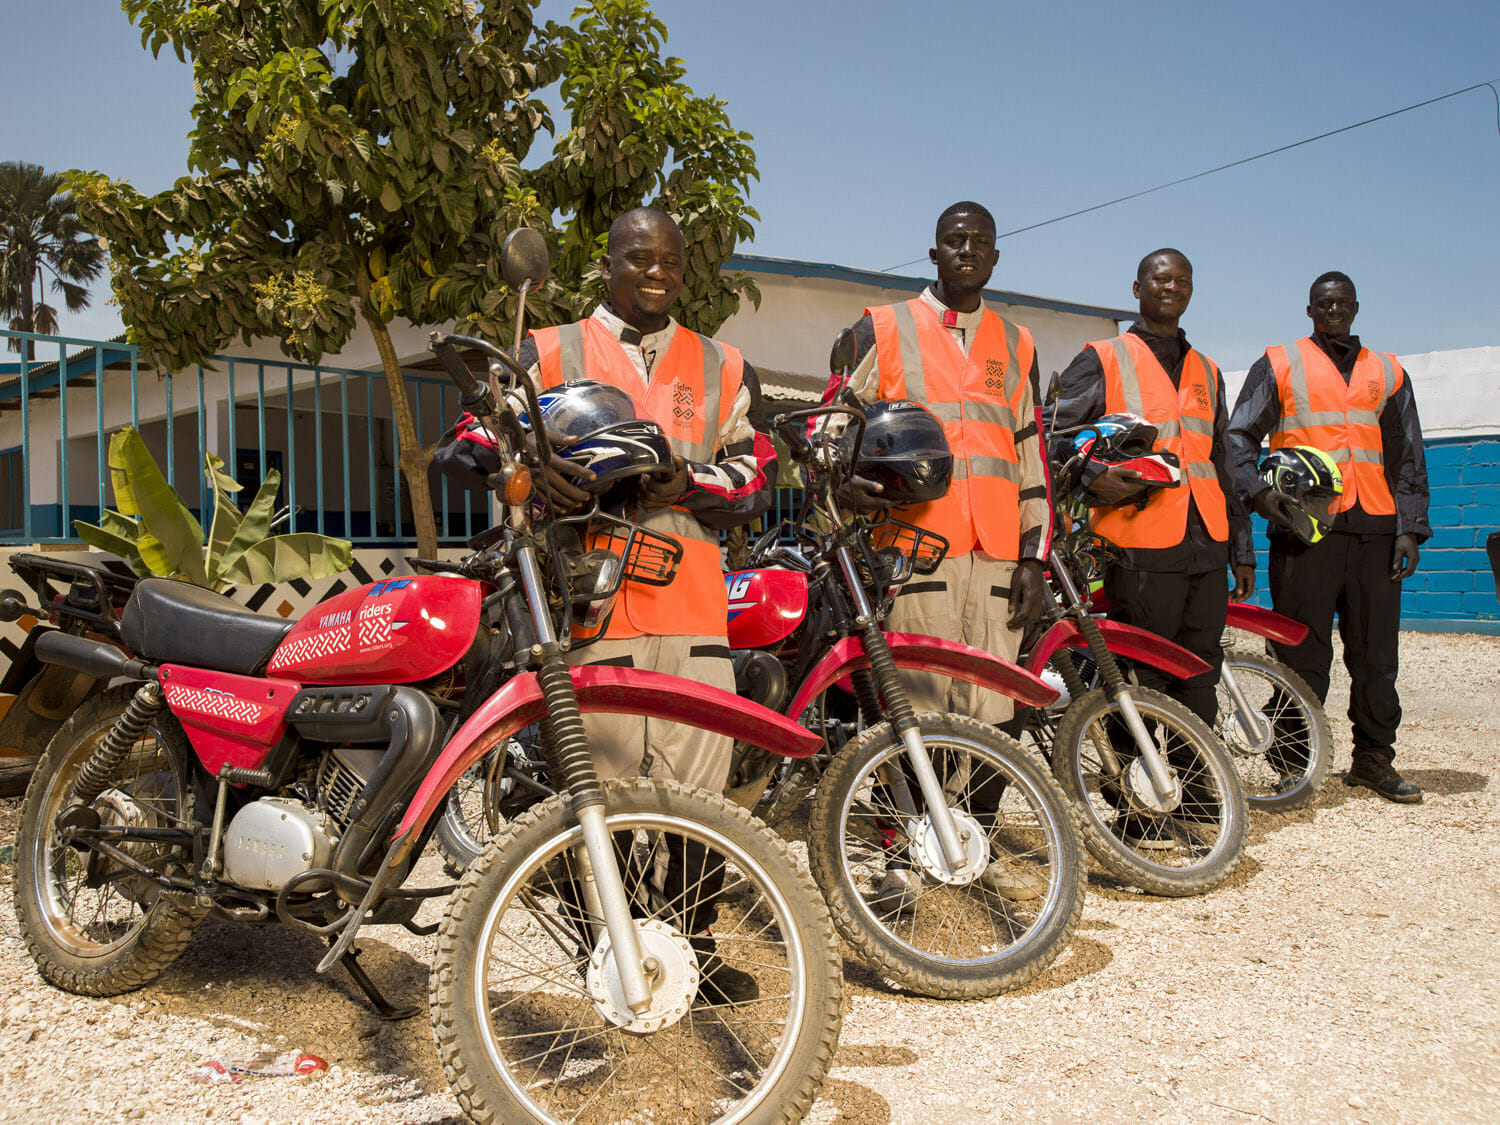 Fleet of motorcycles ridden by healthworkers, The Gambia